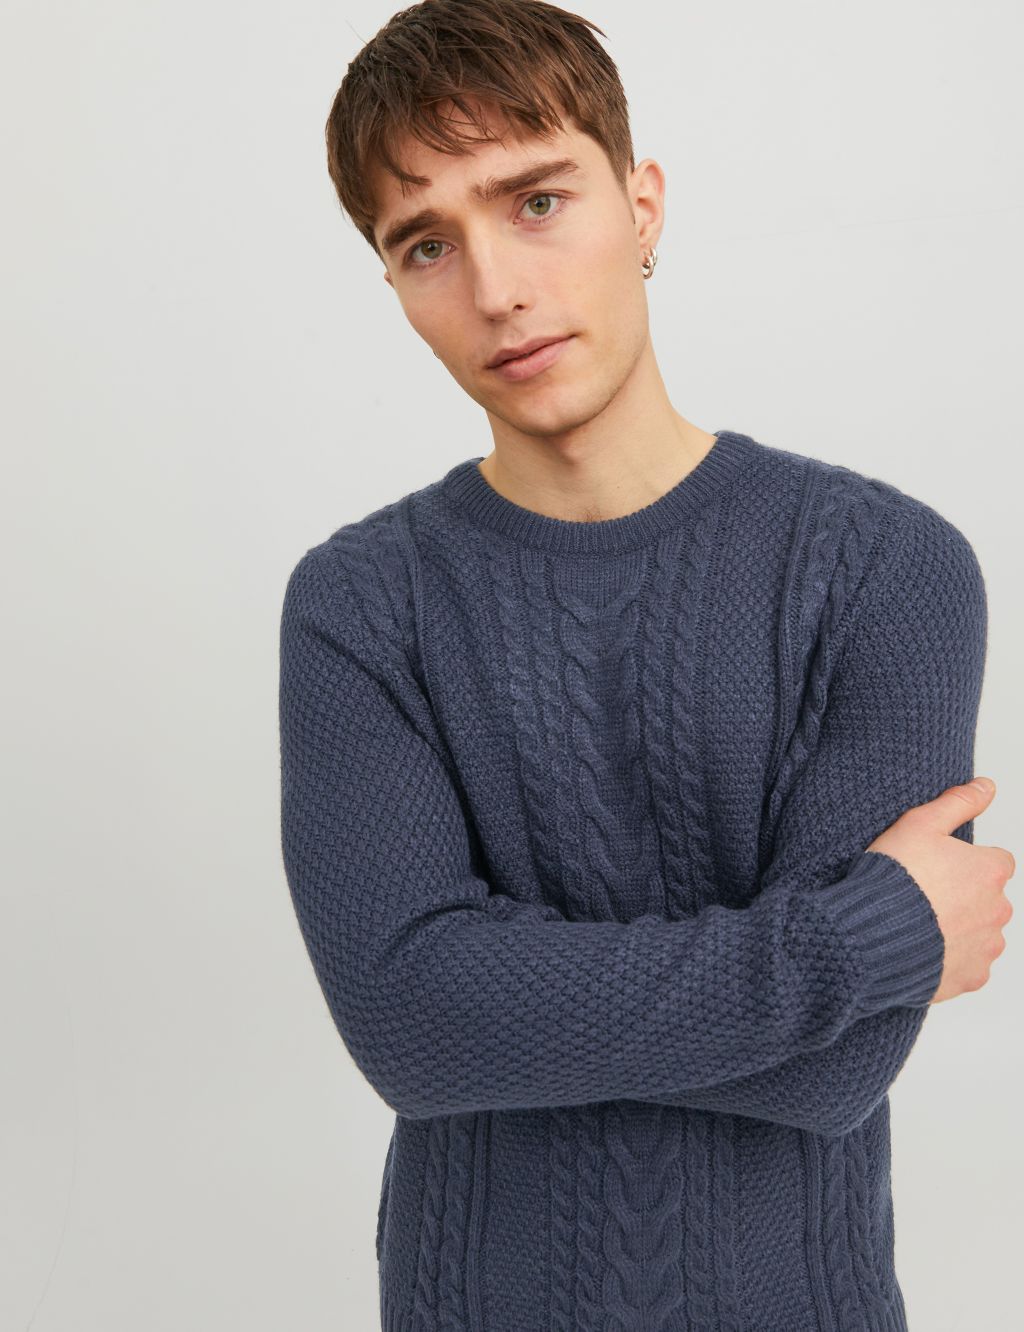 Textured Cable Crew Neck Jumper with Cotton image 7